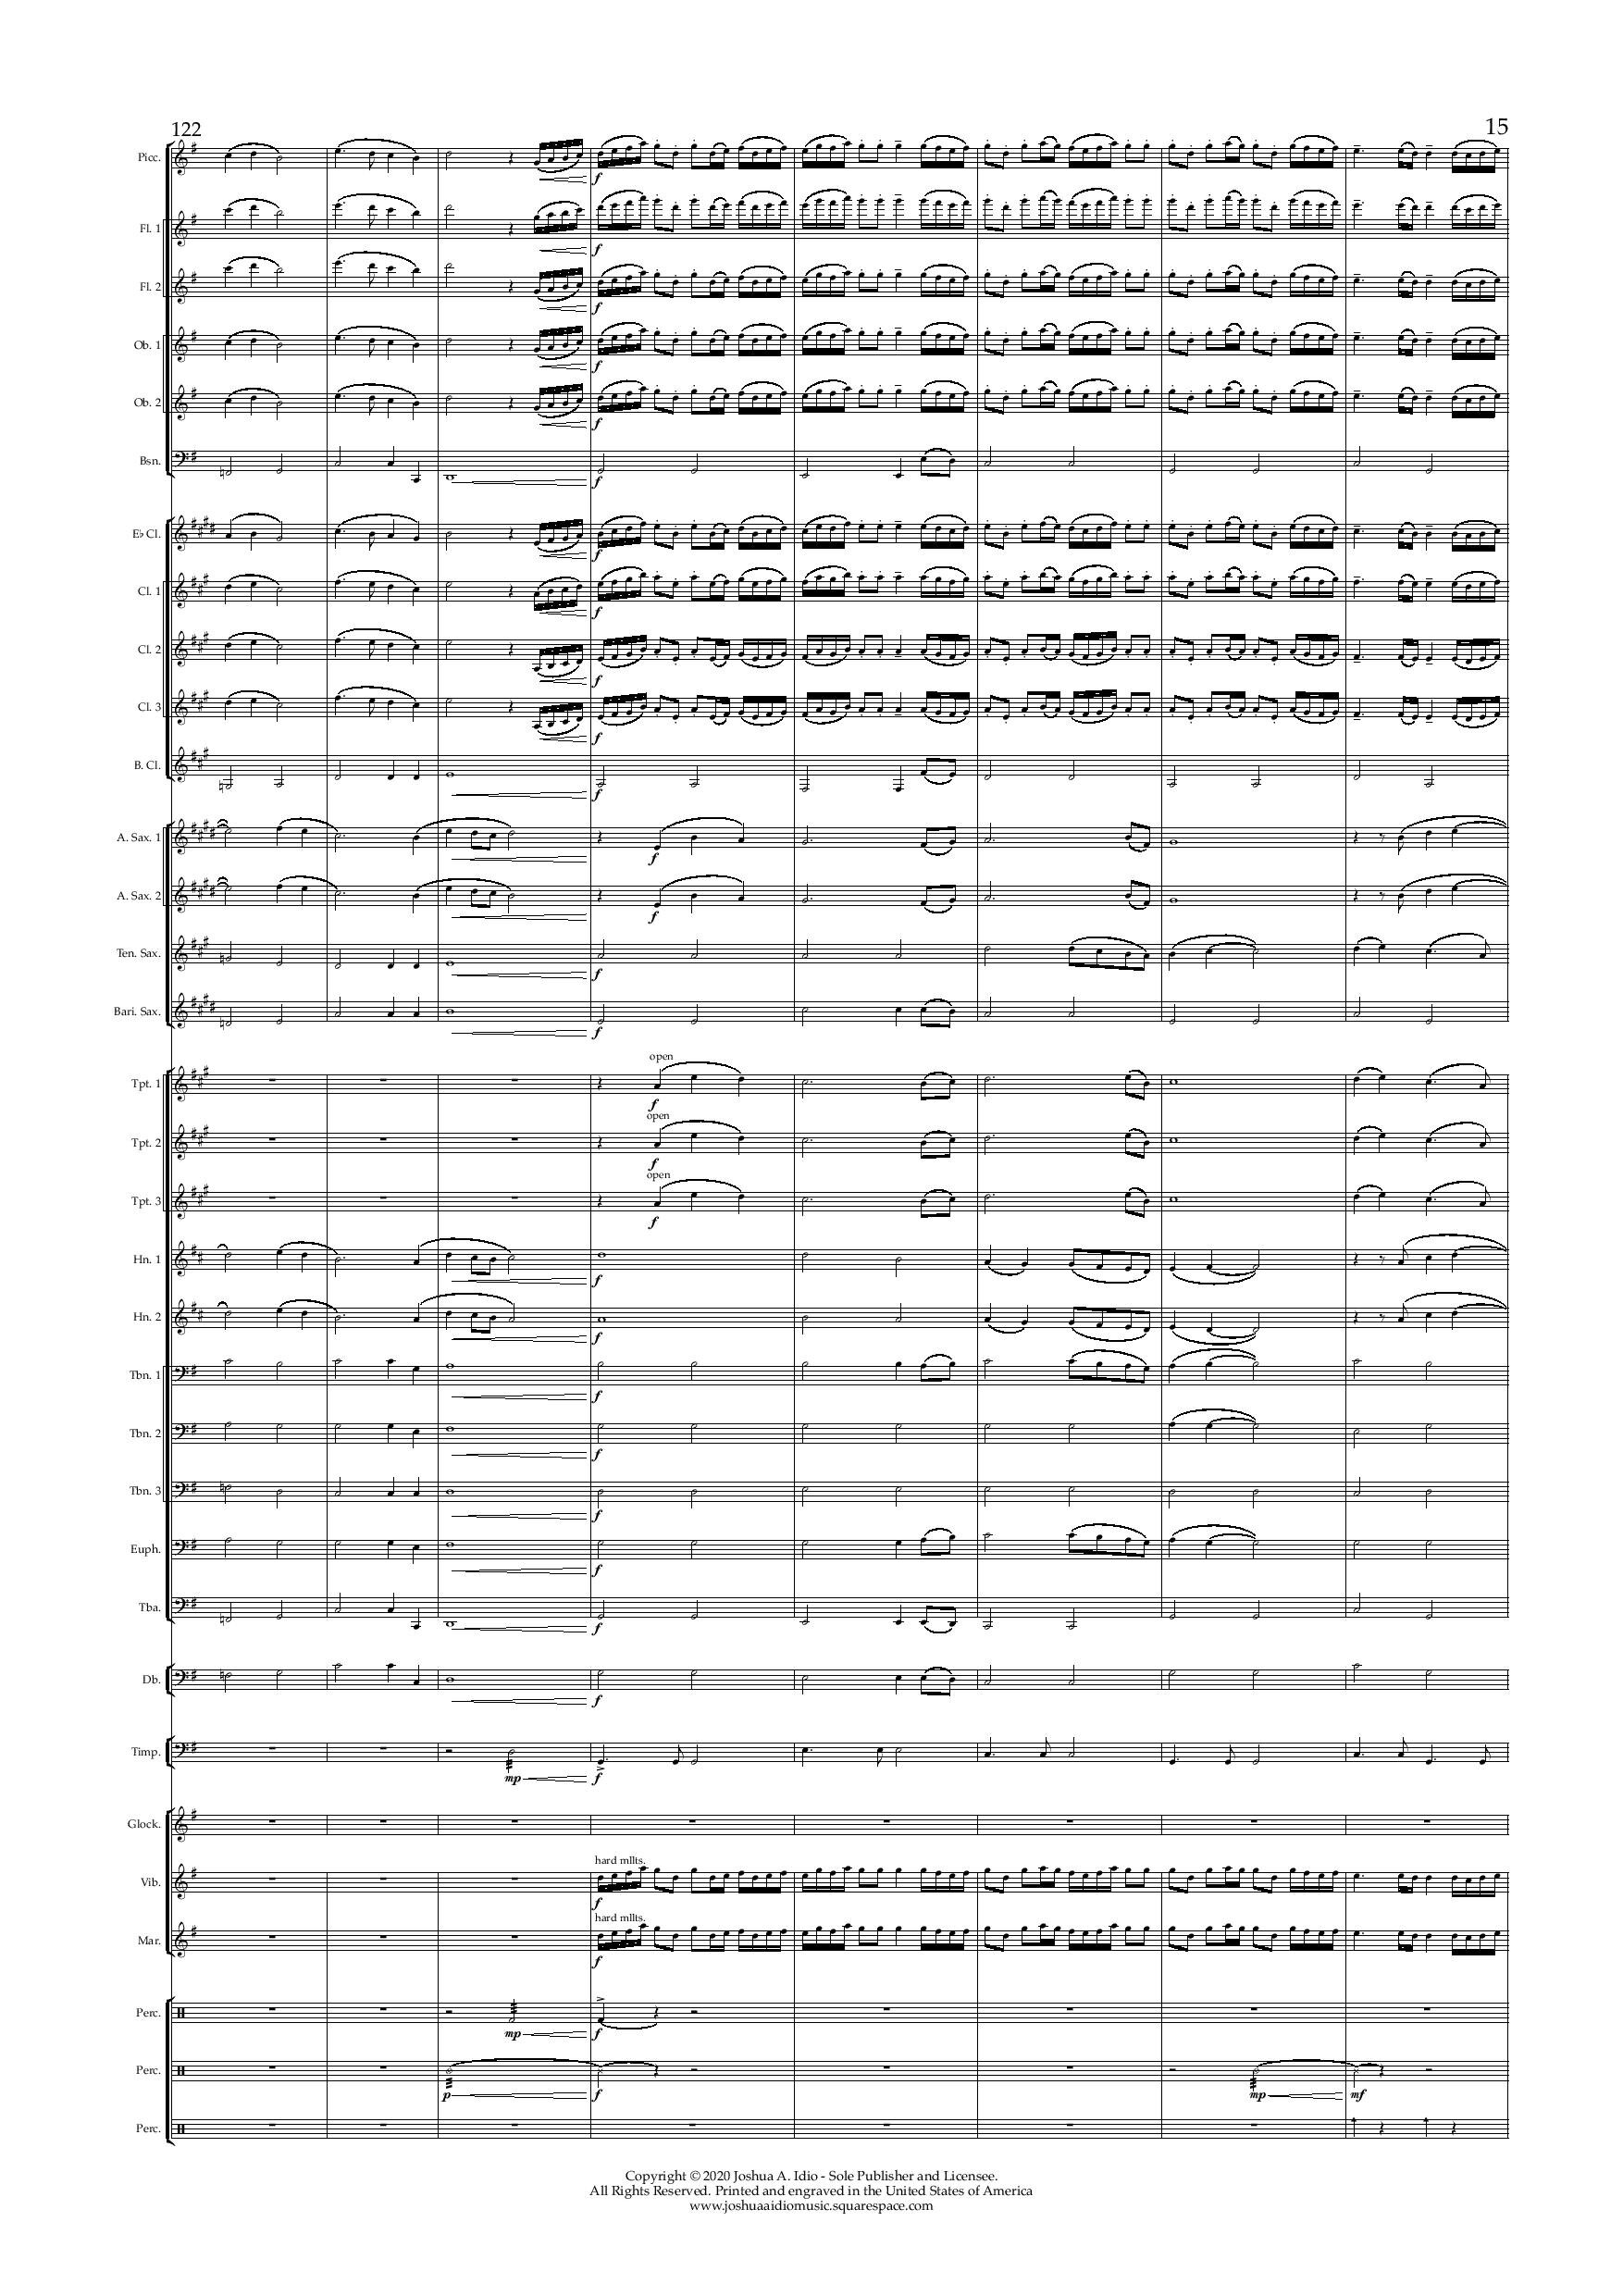 The Cruise Line Dream - Conductor s Score-page-015.jpg